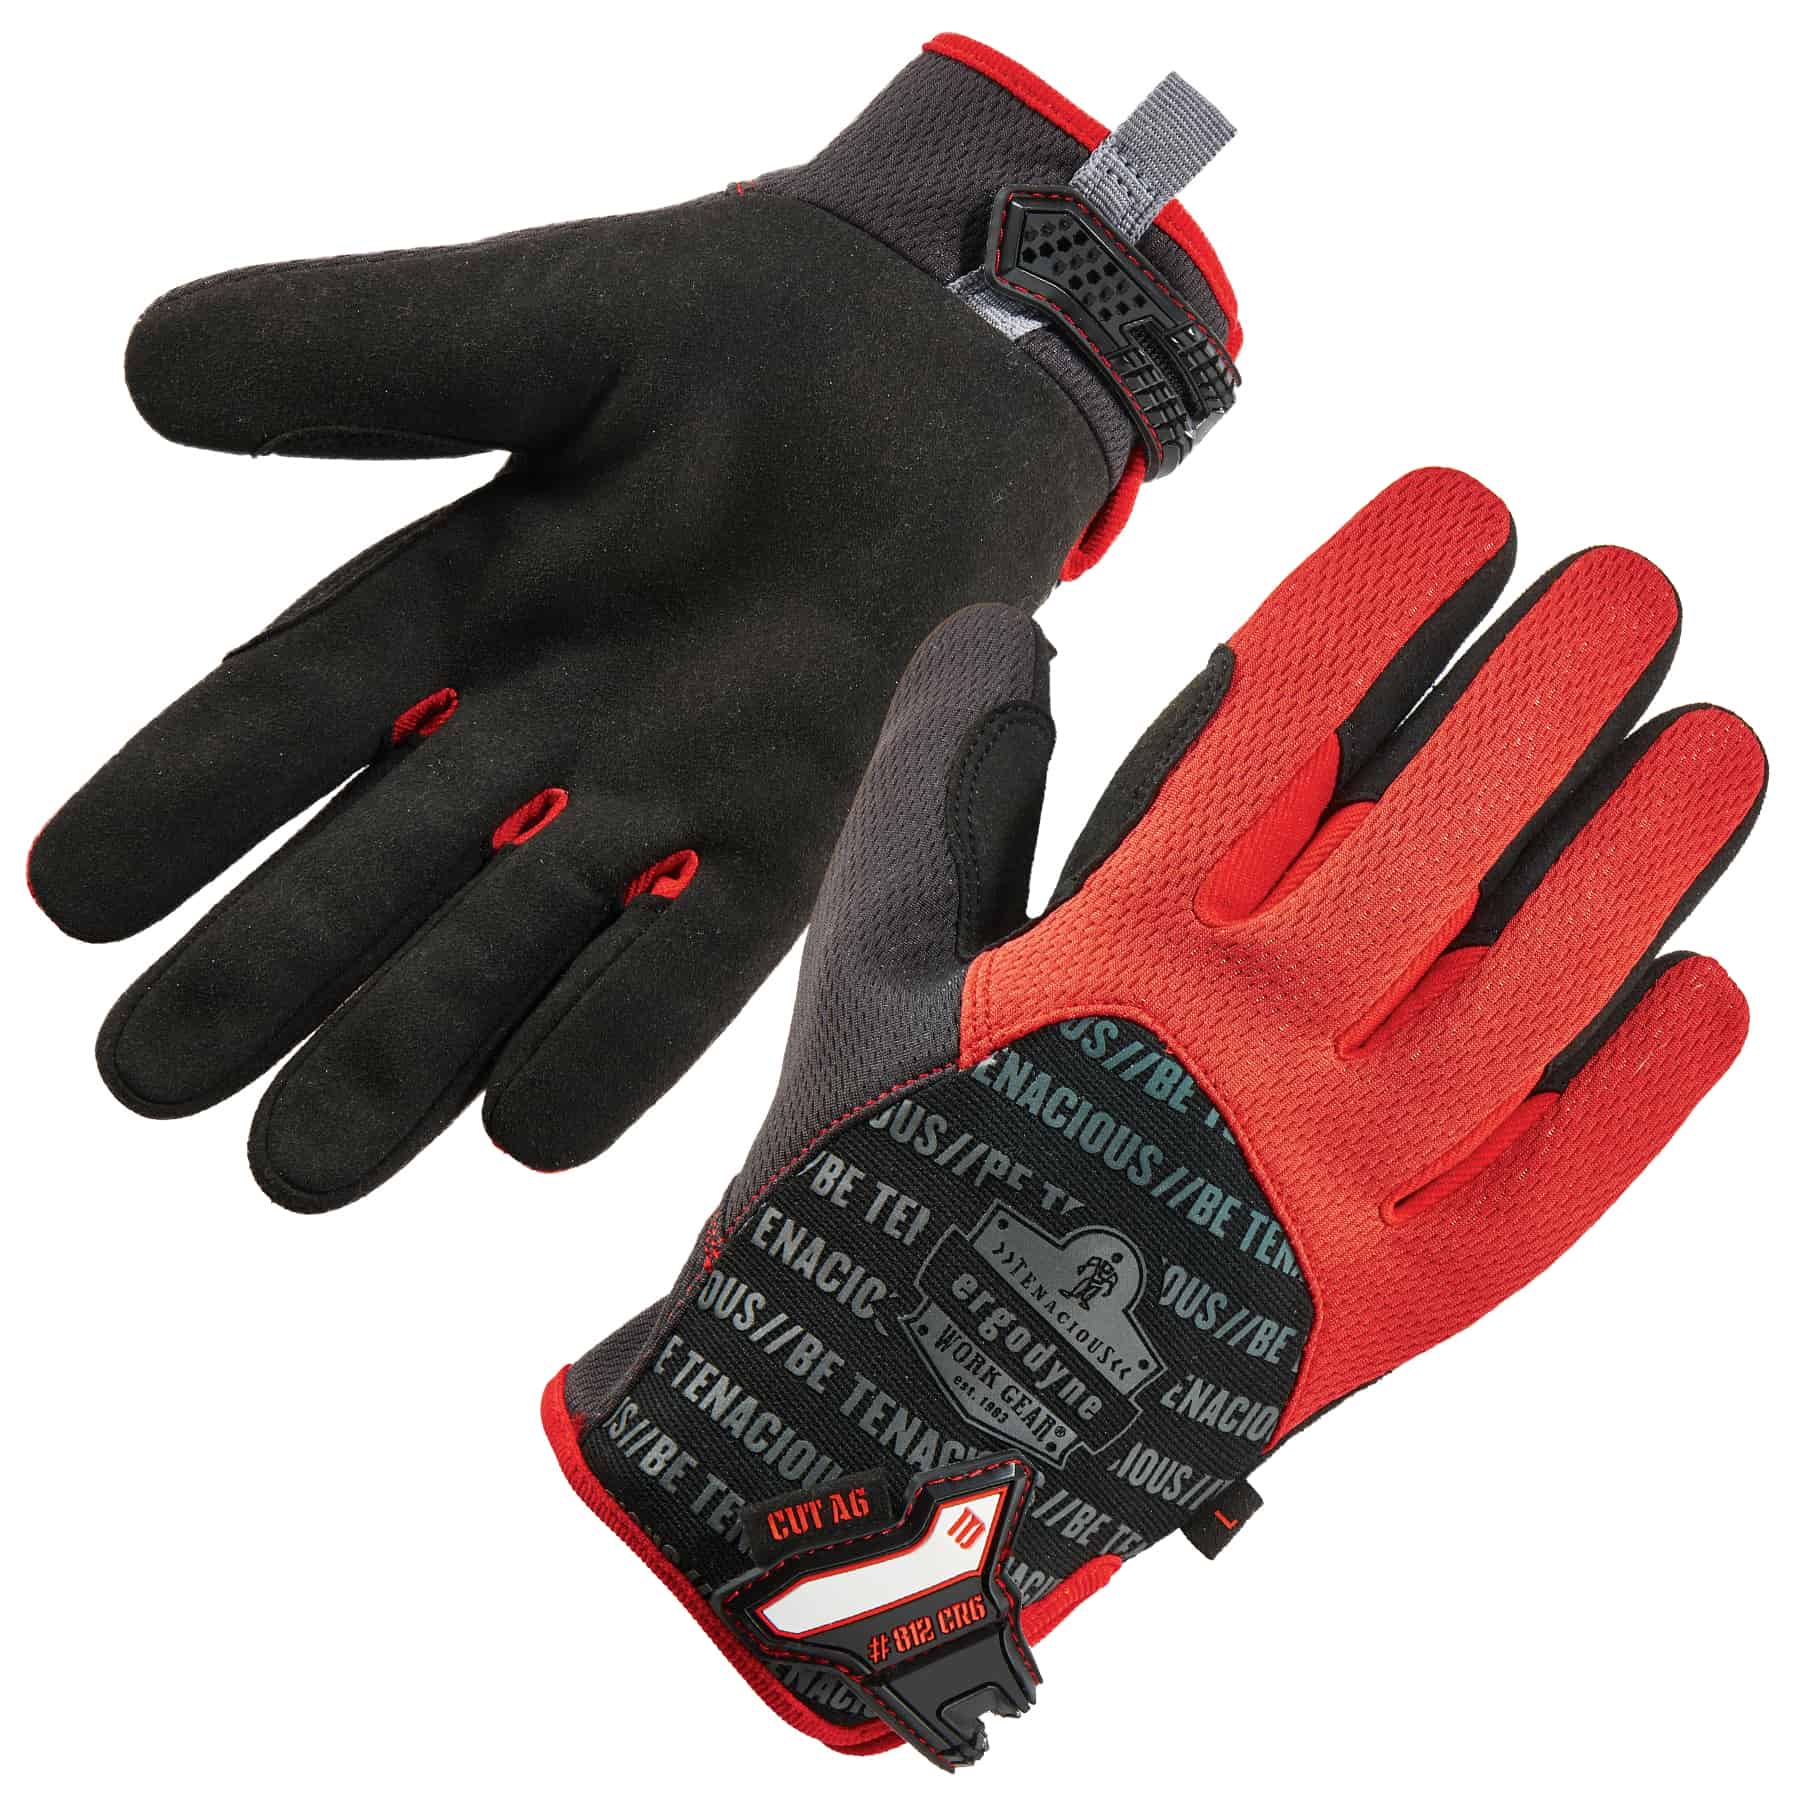 Cut-resistant gloves - Wikipedia